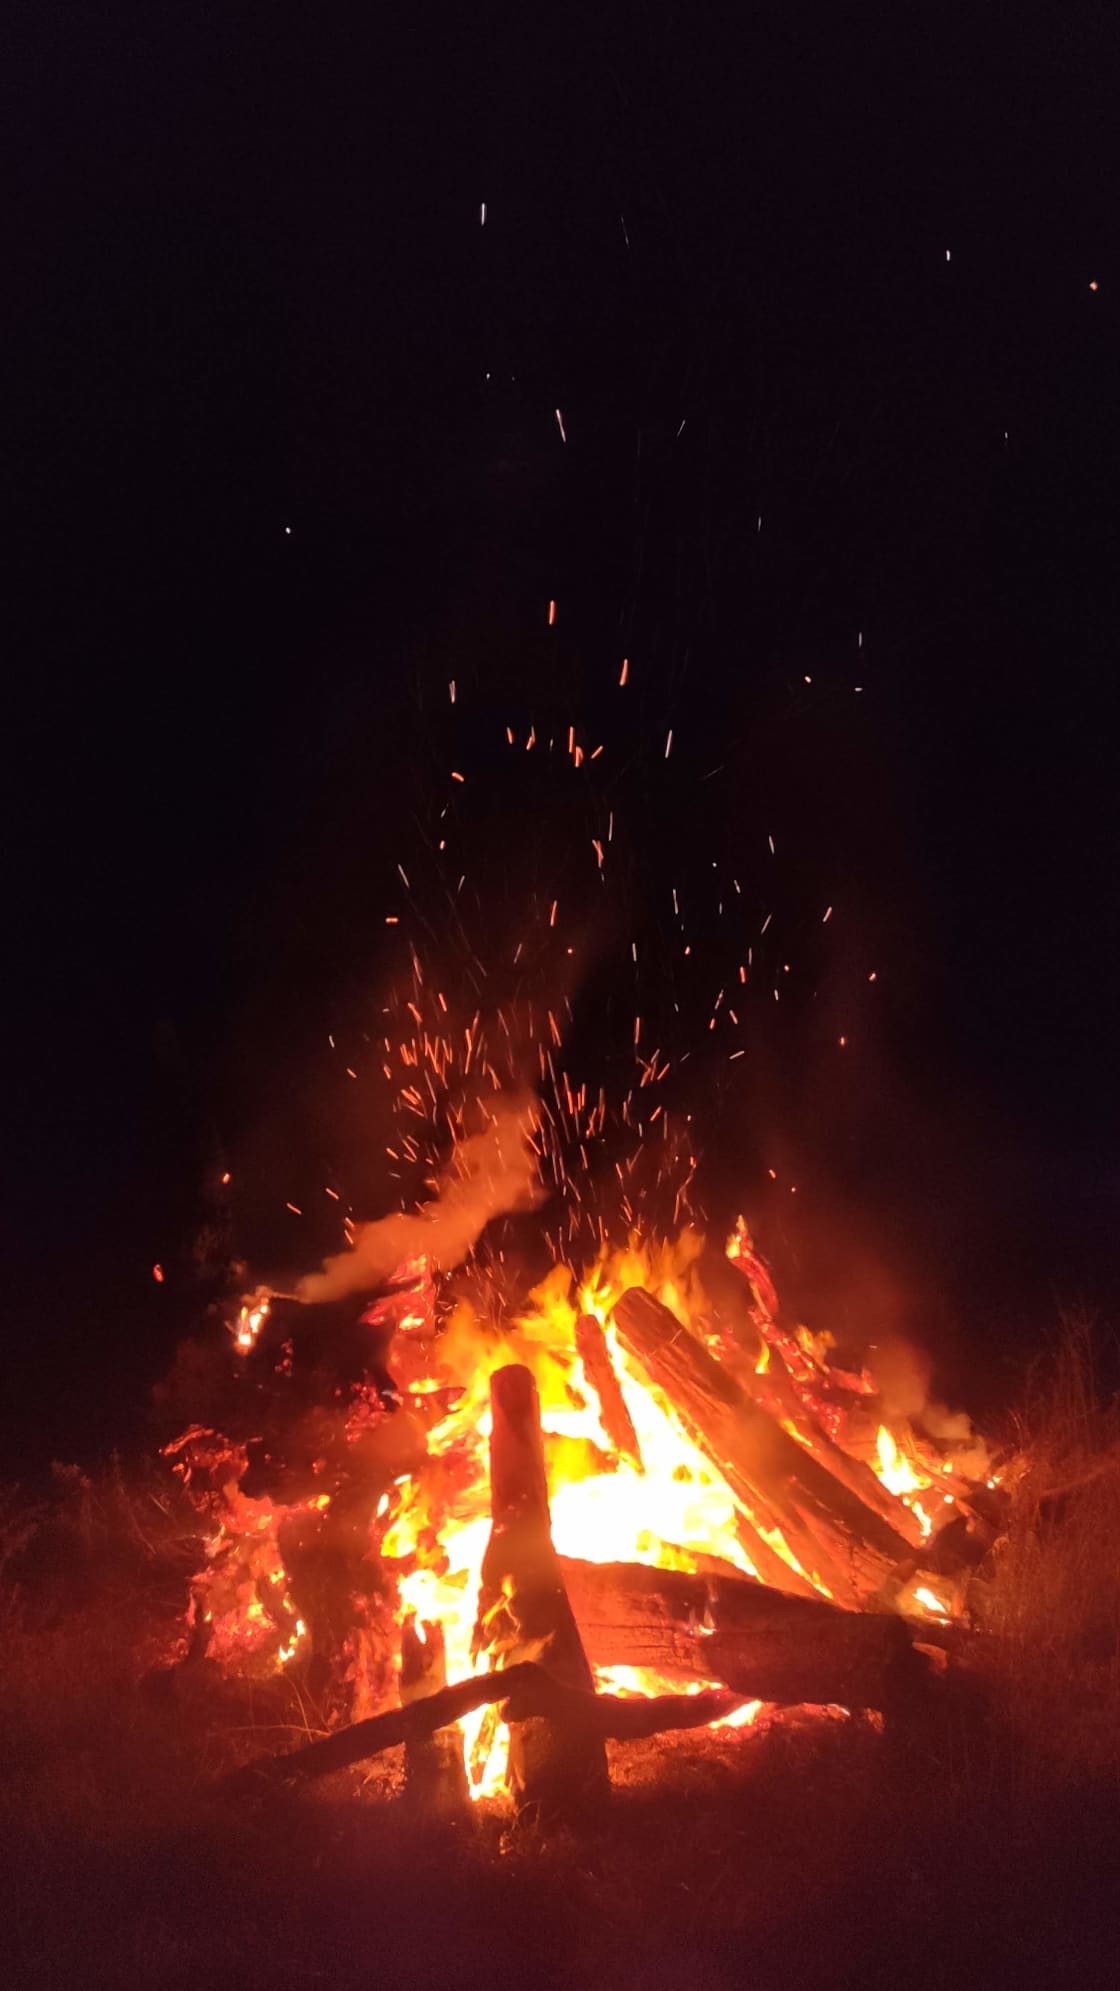 Nothing beats a campfire!